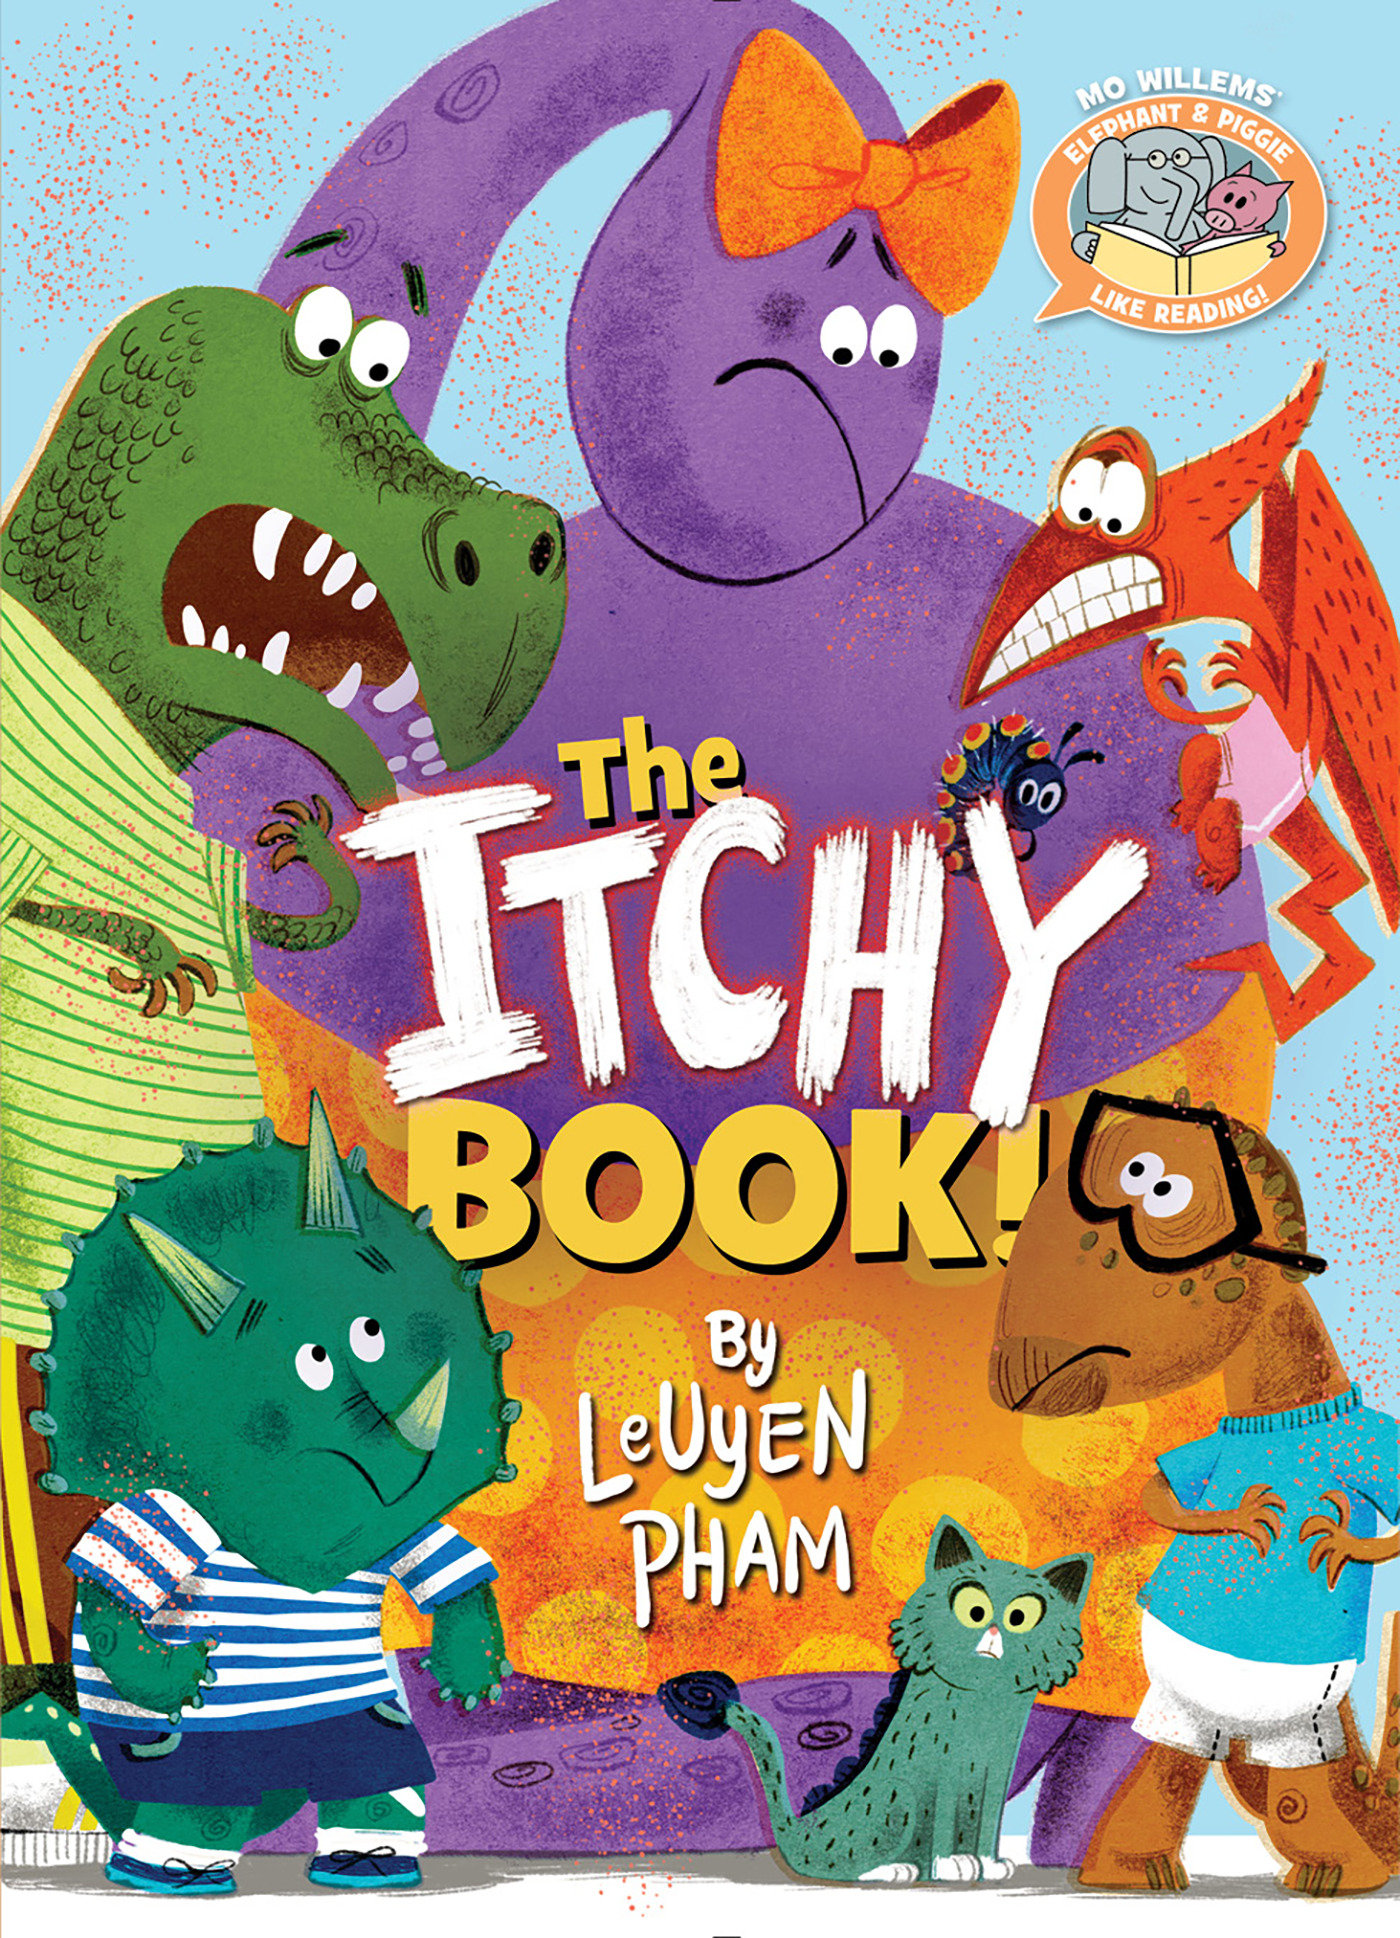 The Itchy Book!-Elephant & Piggie Like Reading! (Hardcover Book)